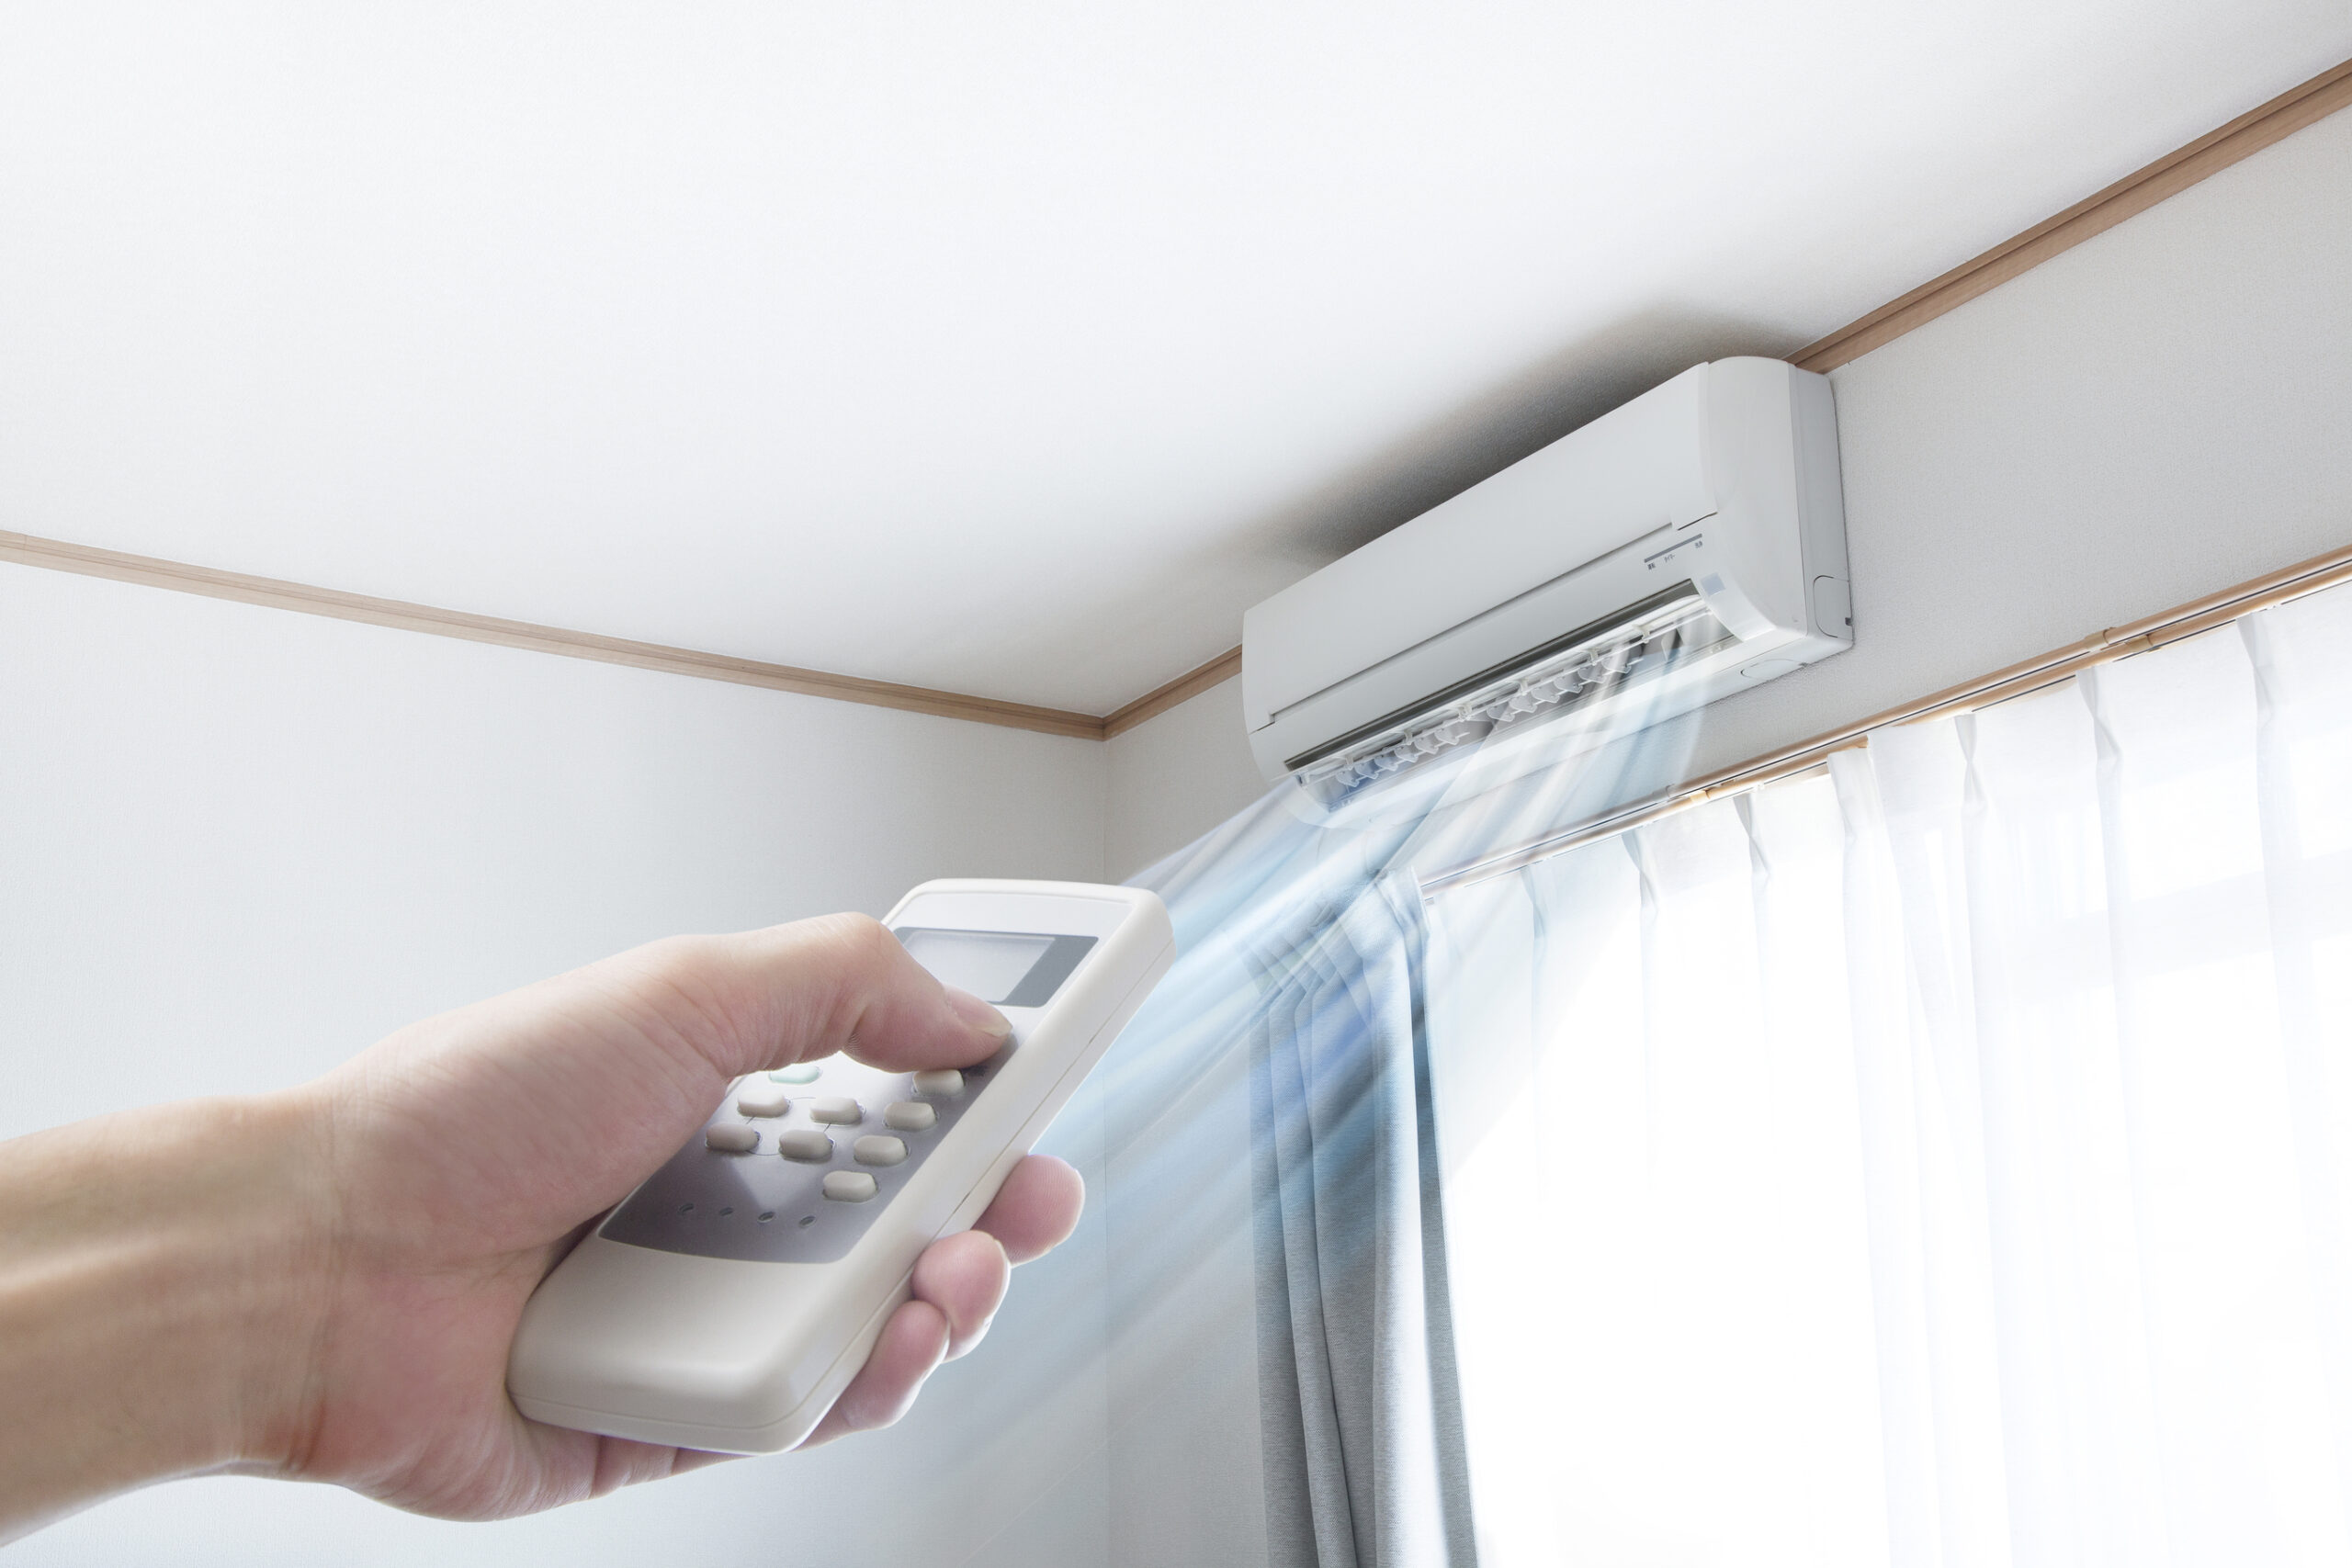 A woman’s hand pointing a remote at a ductless mini-split unit